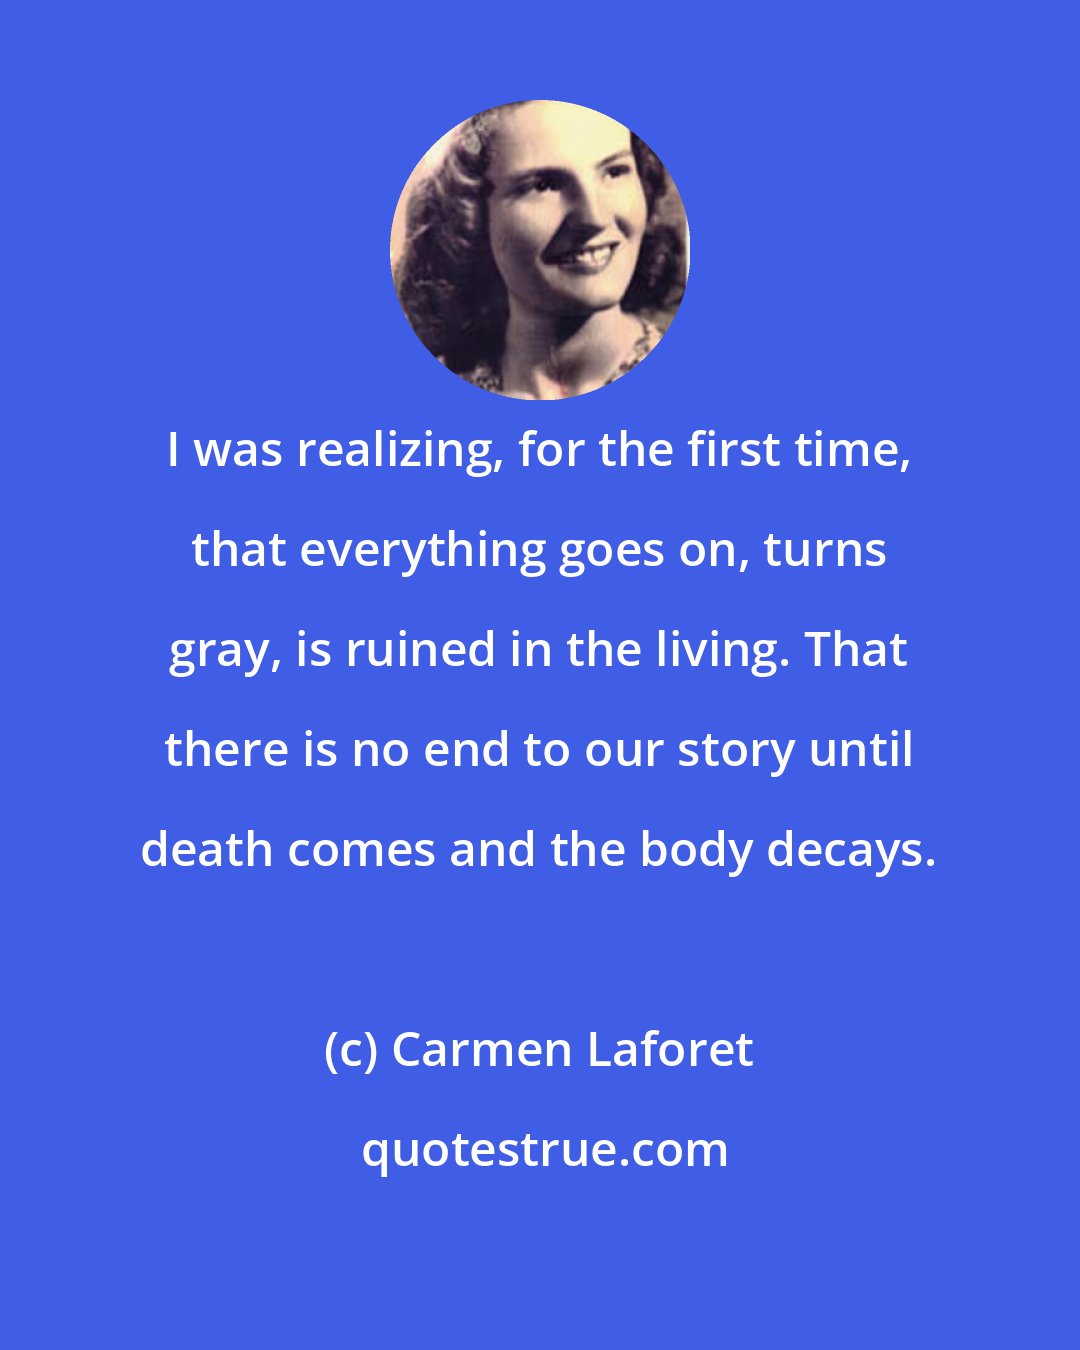 Carmen Laforet: I was realizing, for the first time, that everything goes on, turns gray, is ruined in the living. That there is no end to our story until death comes and the body decays.